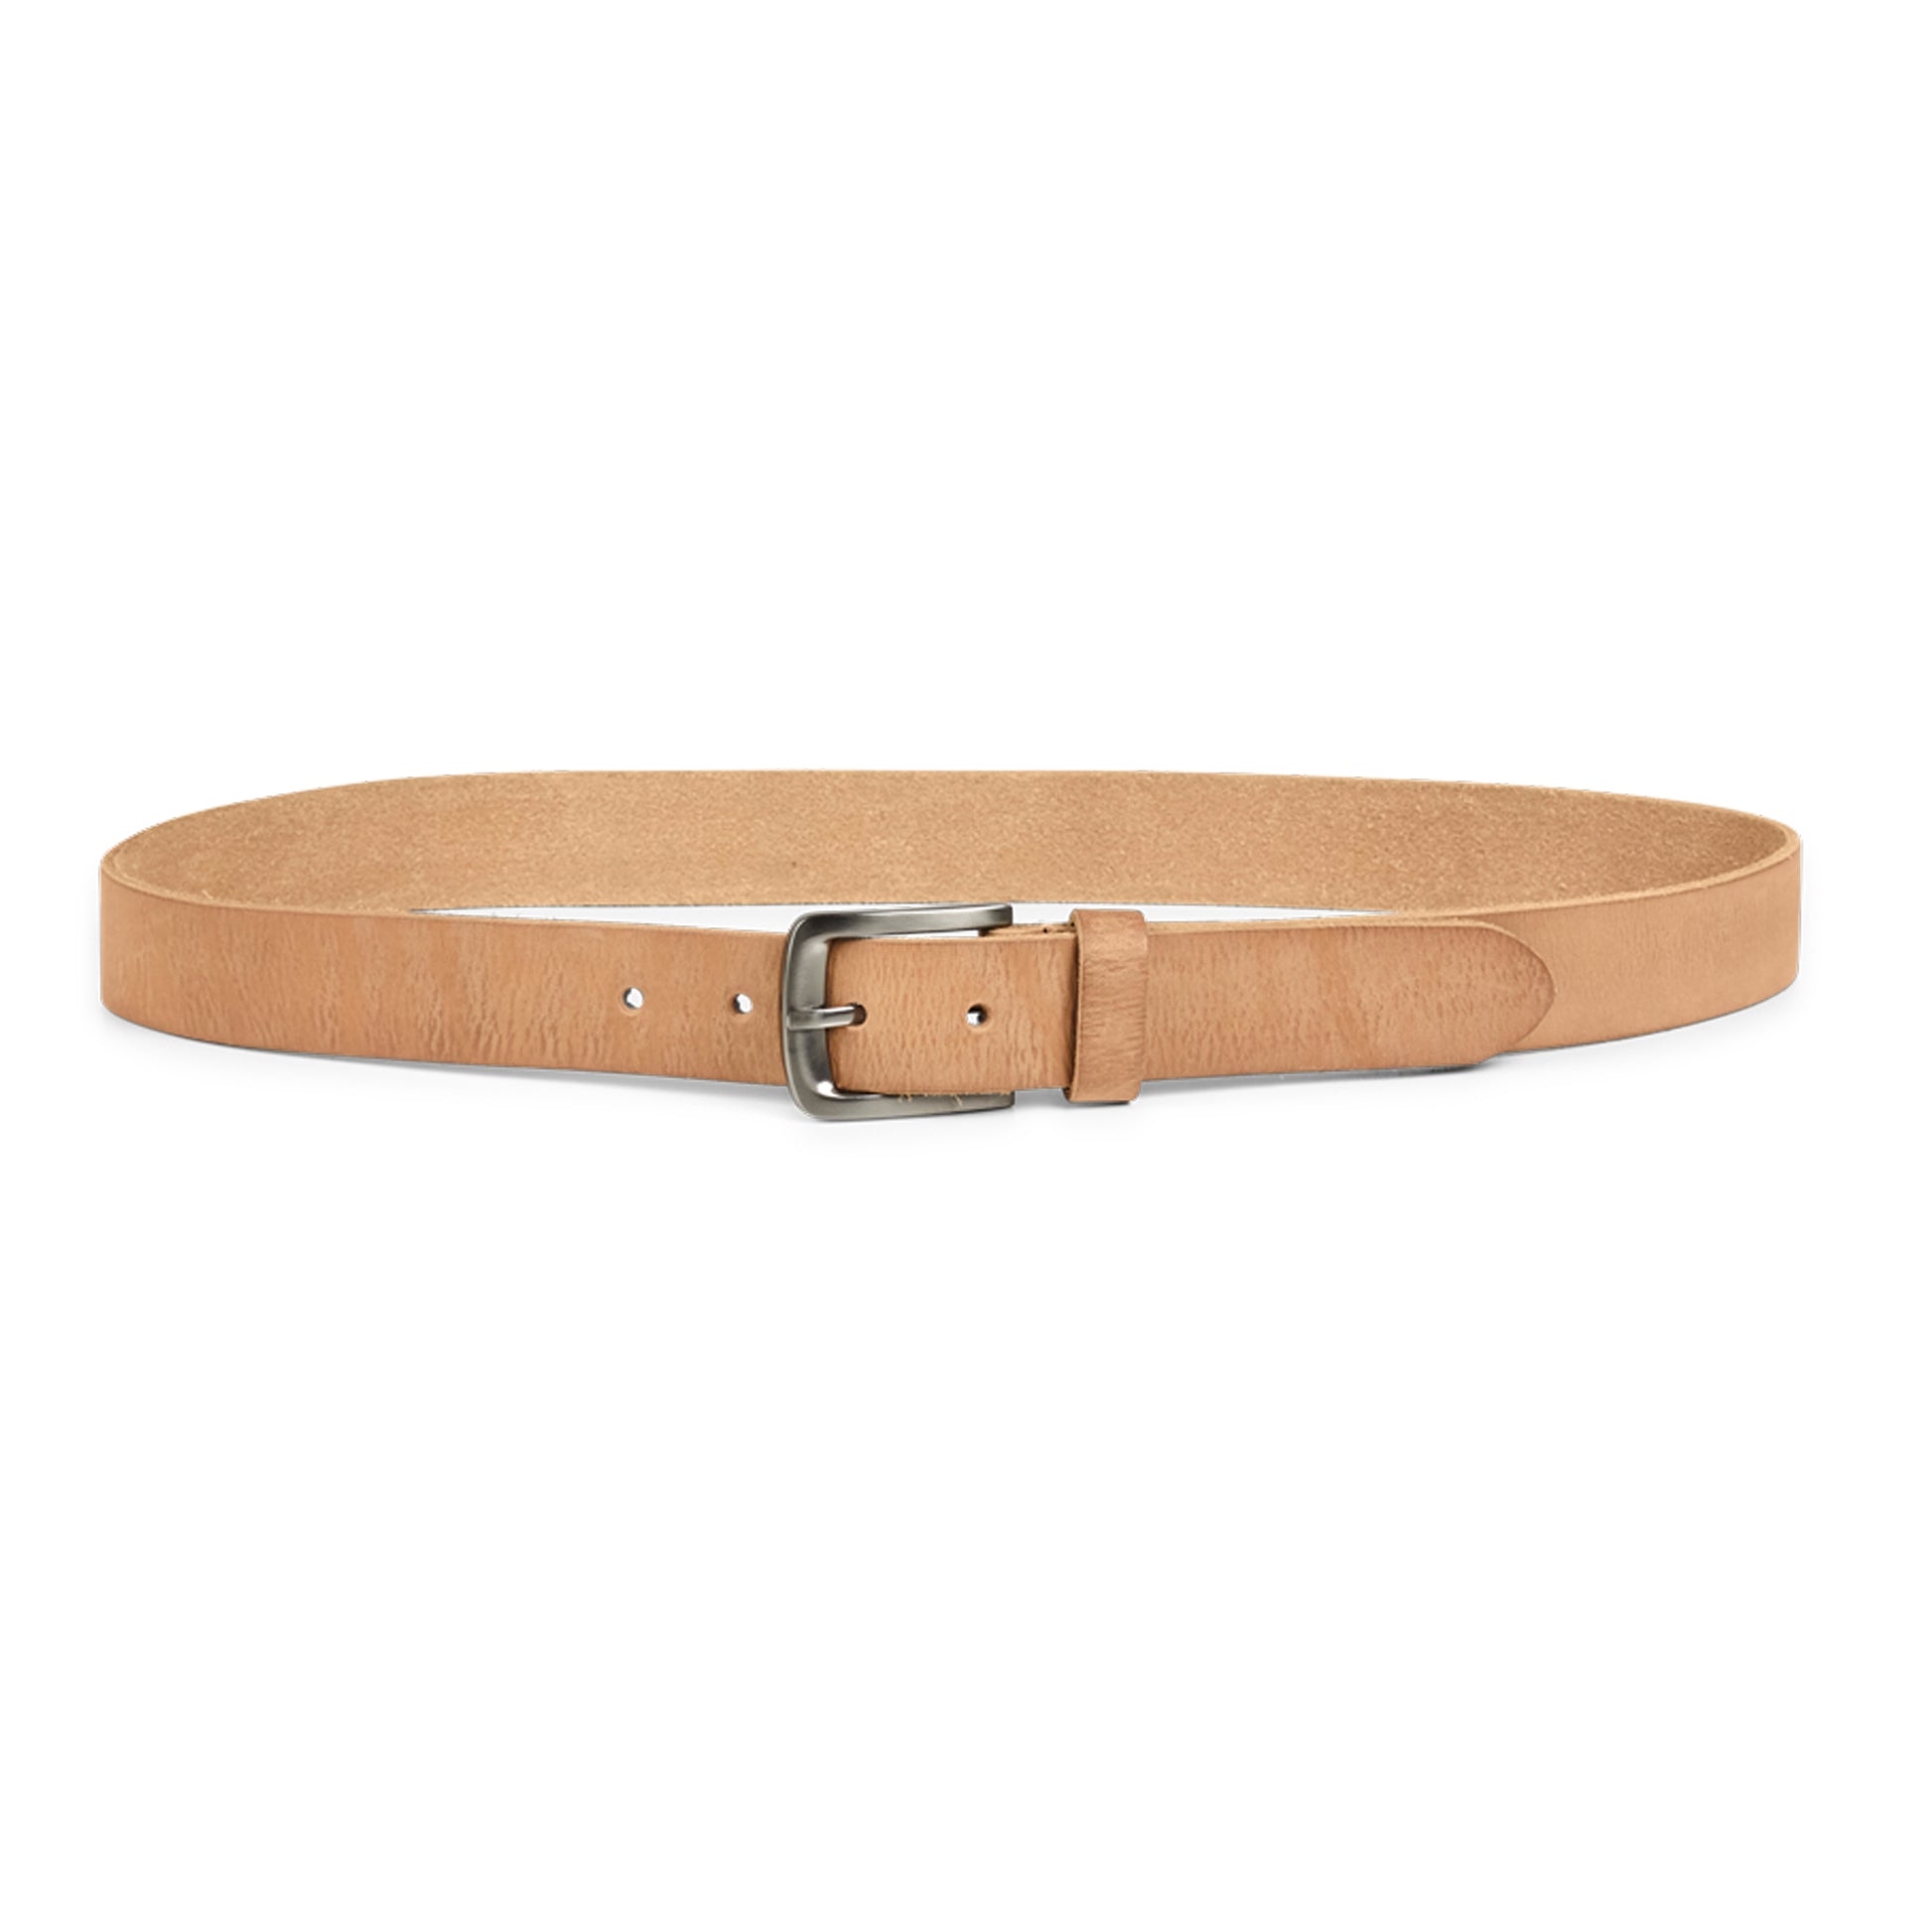 A SharinMBG Belt - Camel by Markberg with a distressed finish on a white background.